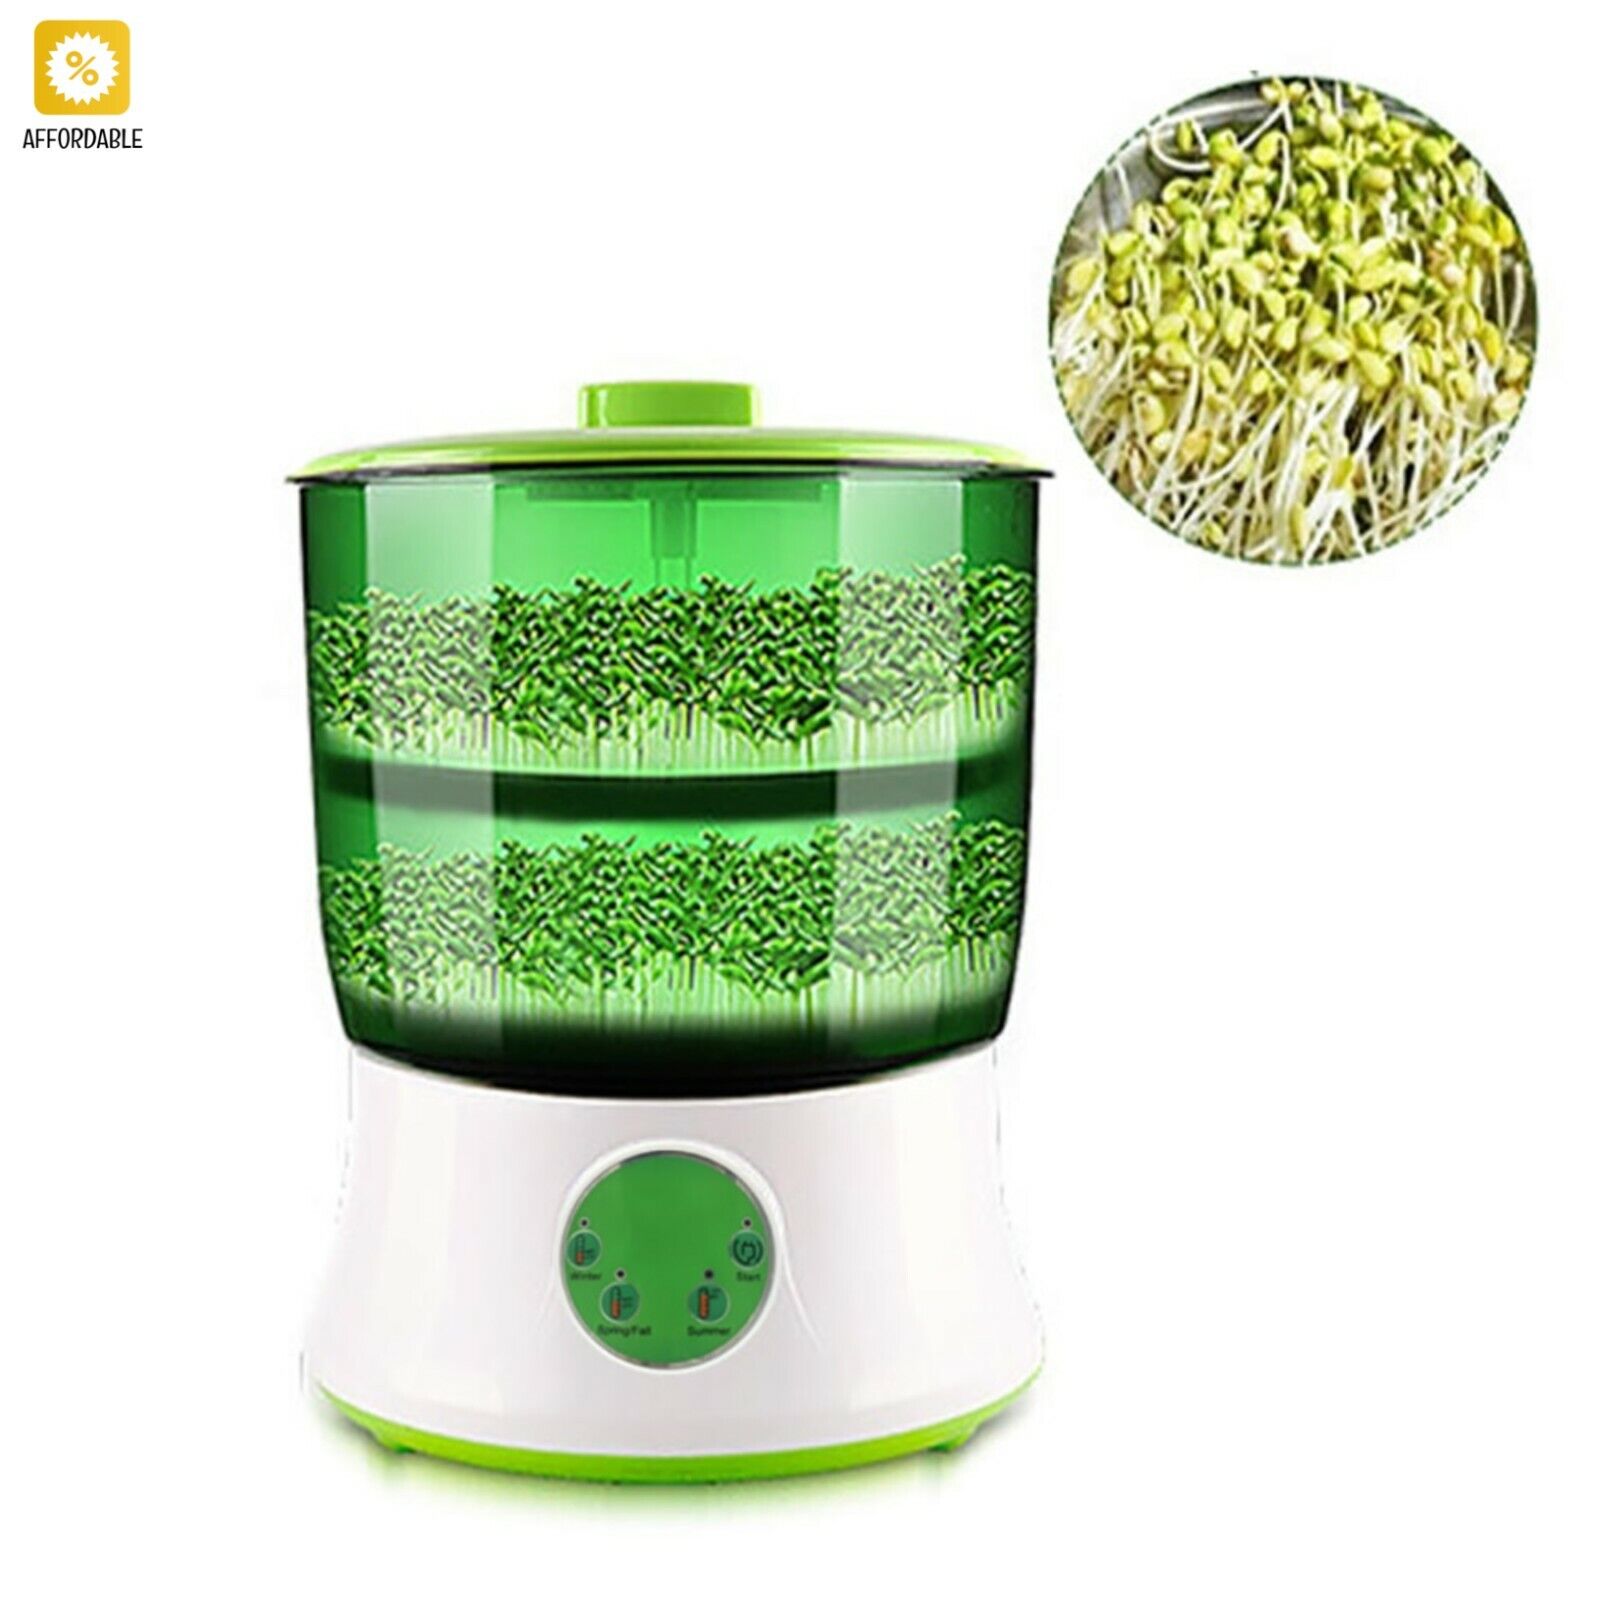 Automatic Bean Sprouts Maker Thermostat Electric Germinator Seedling Sprout 